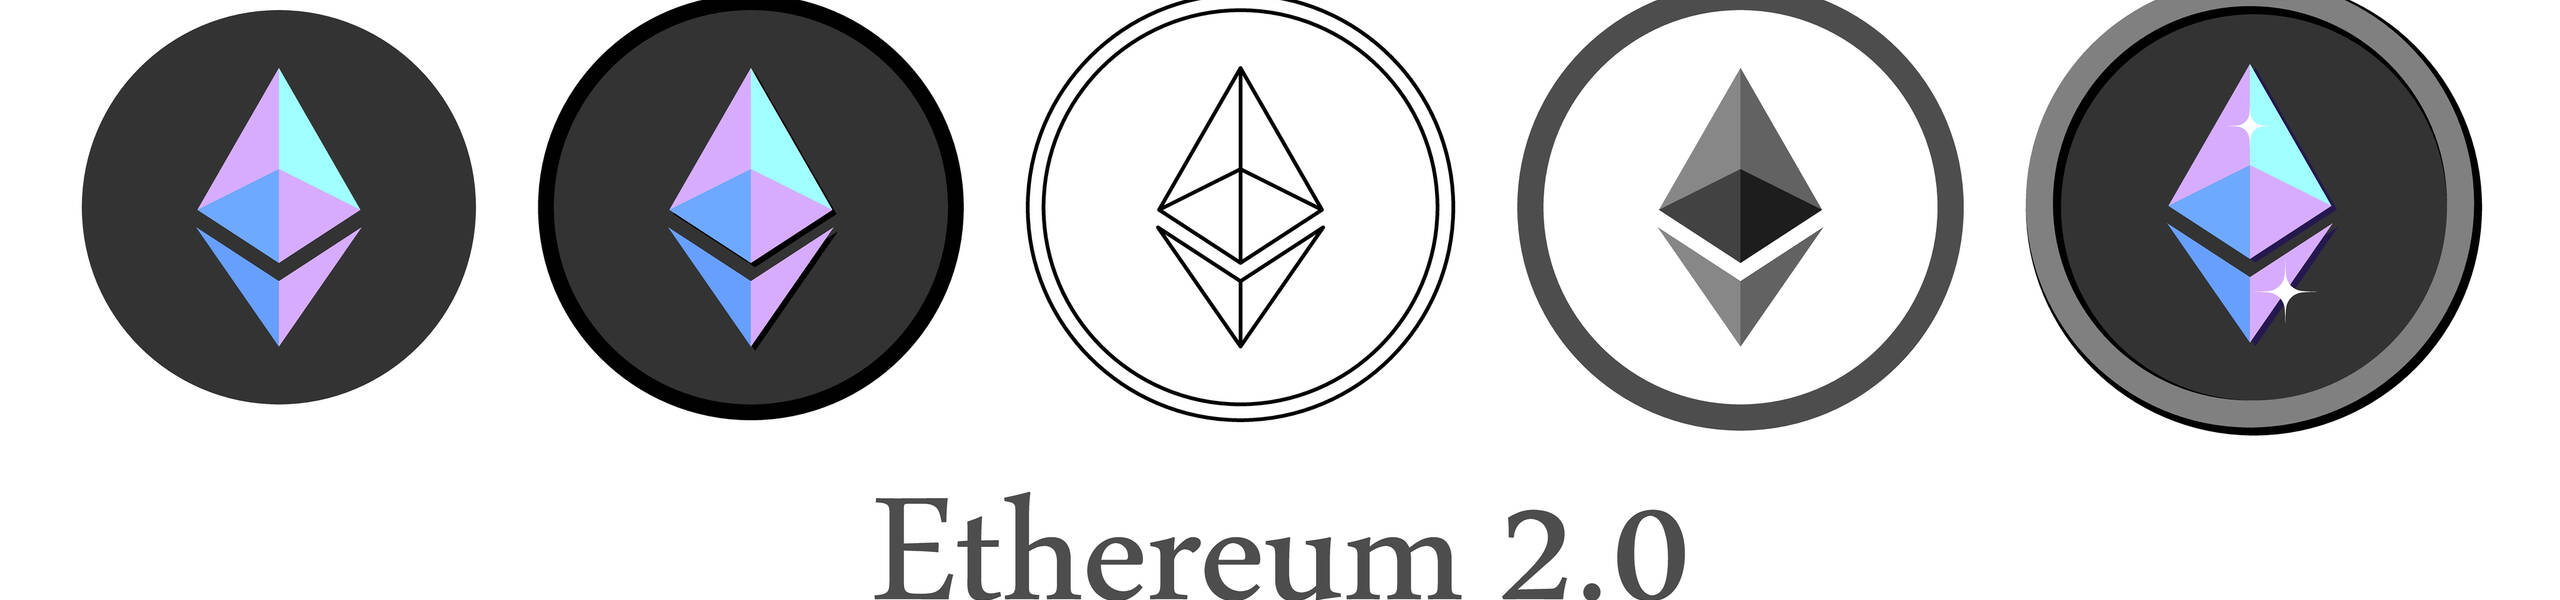 POS: Not Best Option for ETH